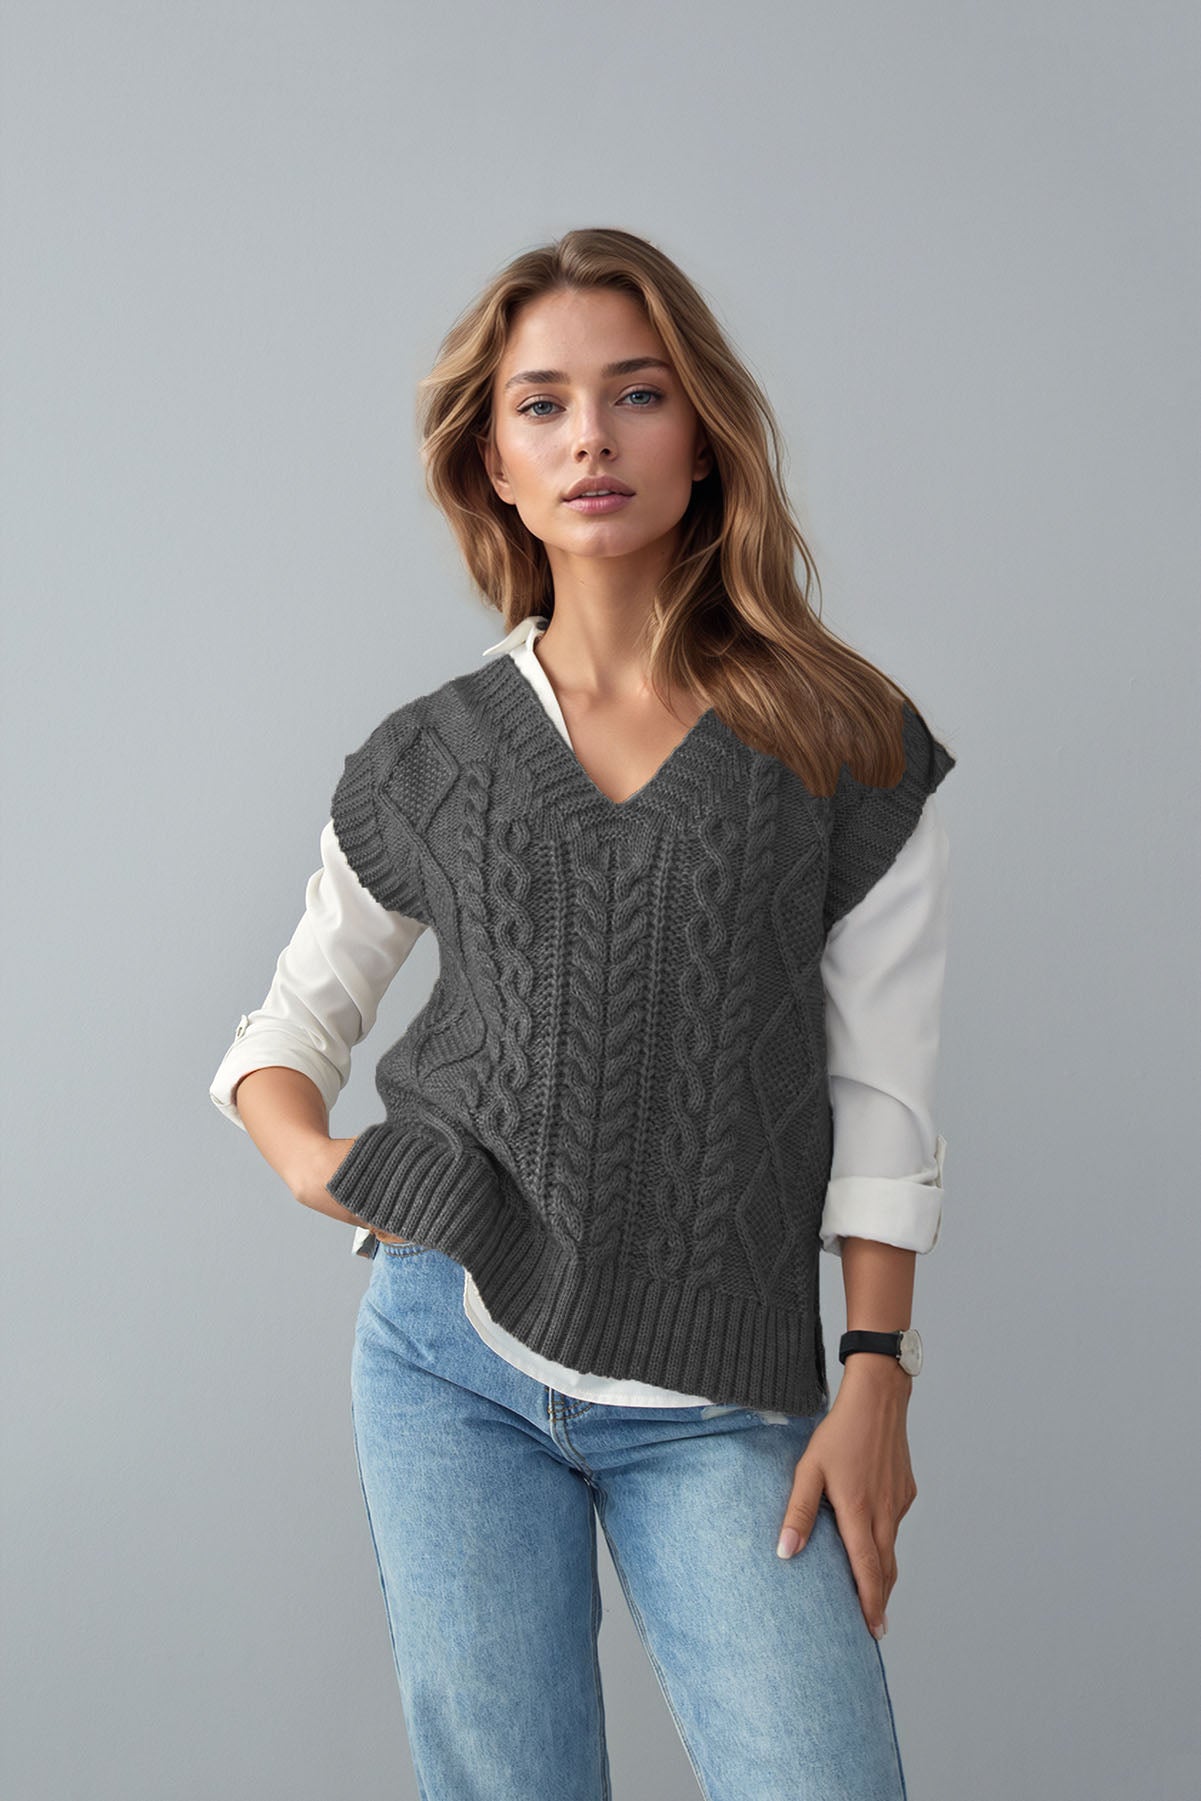 Cable Knit Sweater Vest – Canada Knitwear